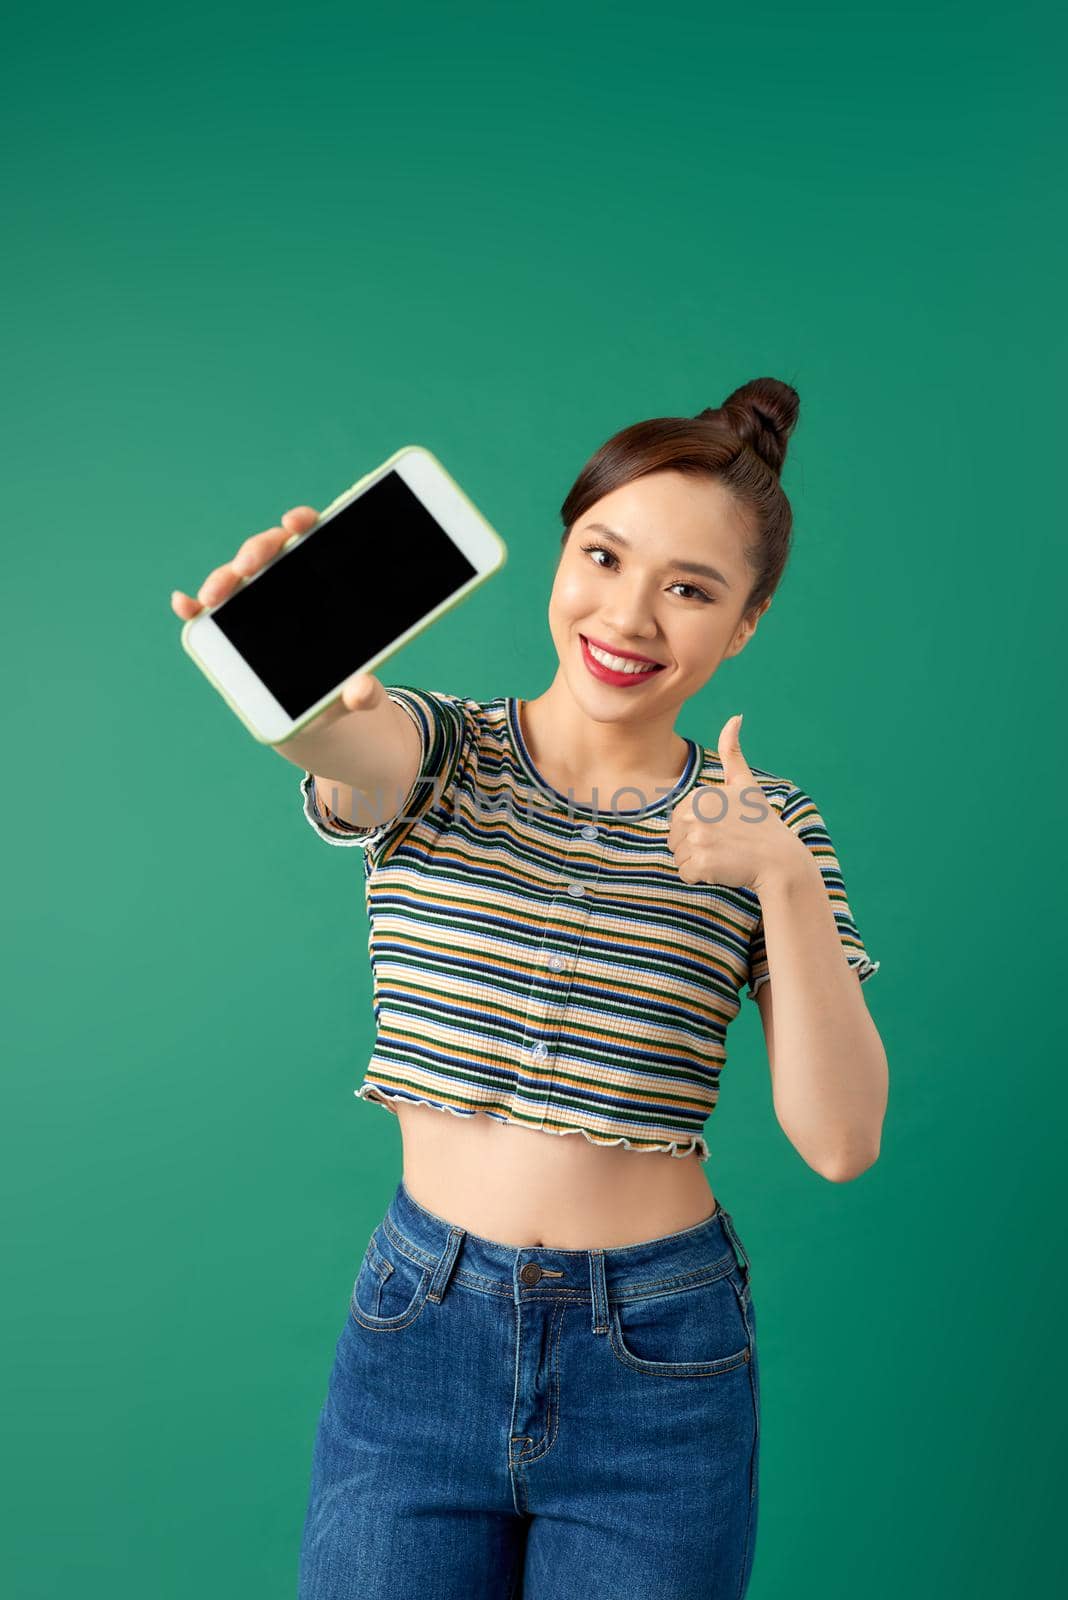 Close up portrait of a smiling Asian woman showing blank screen mobile phone over green background.